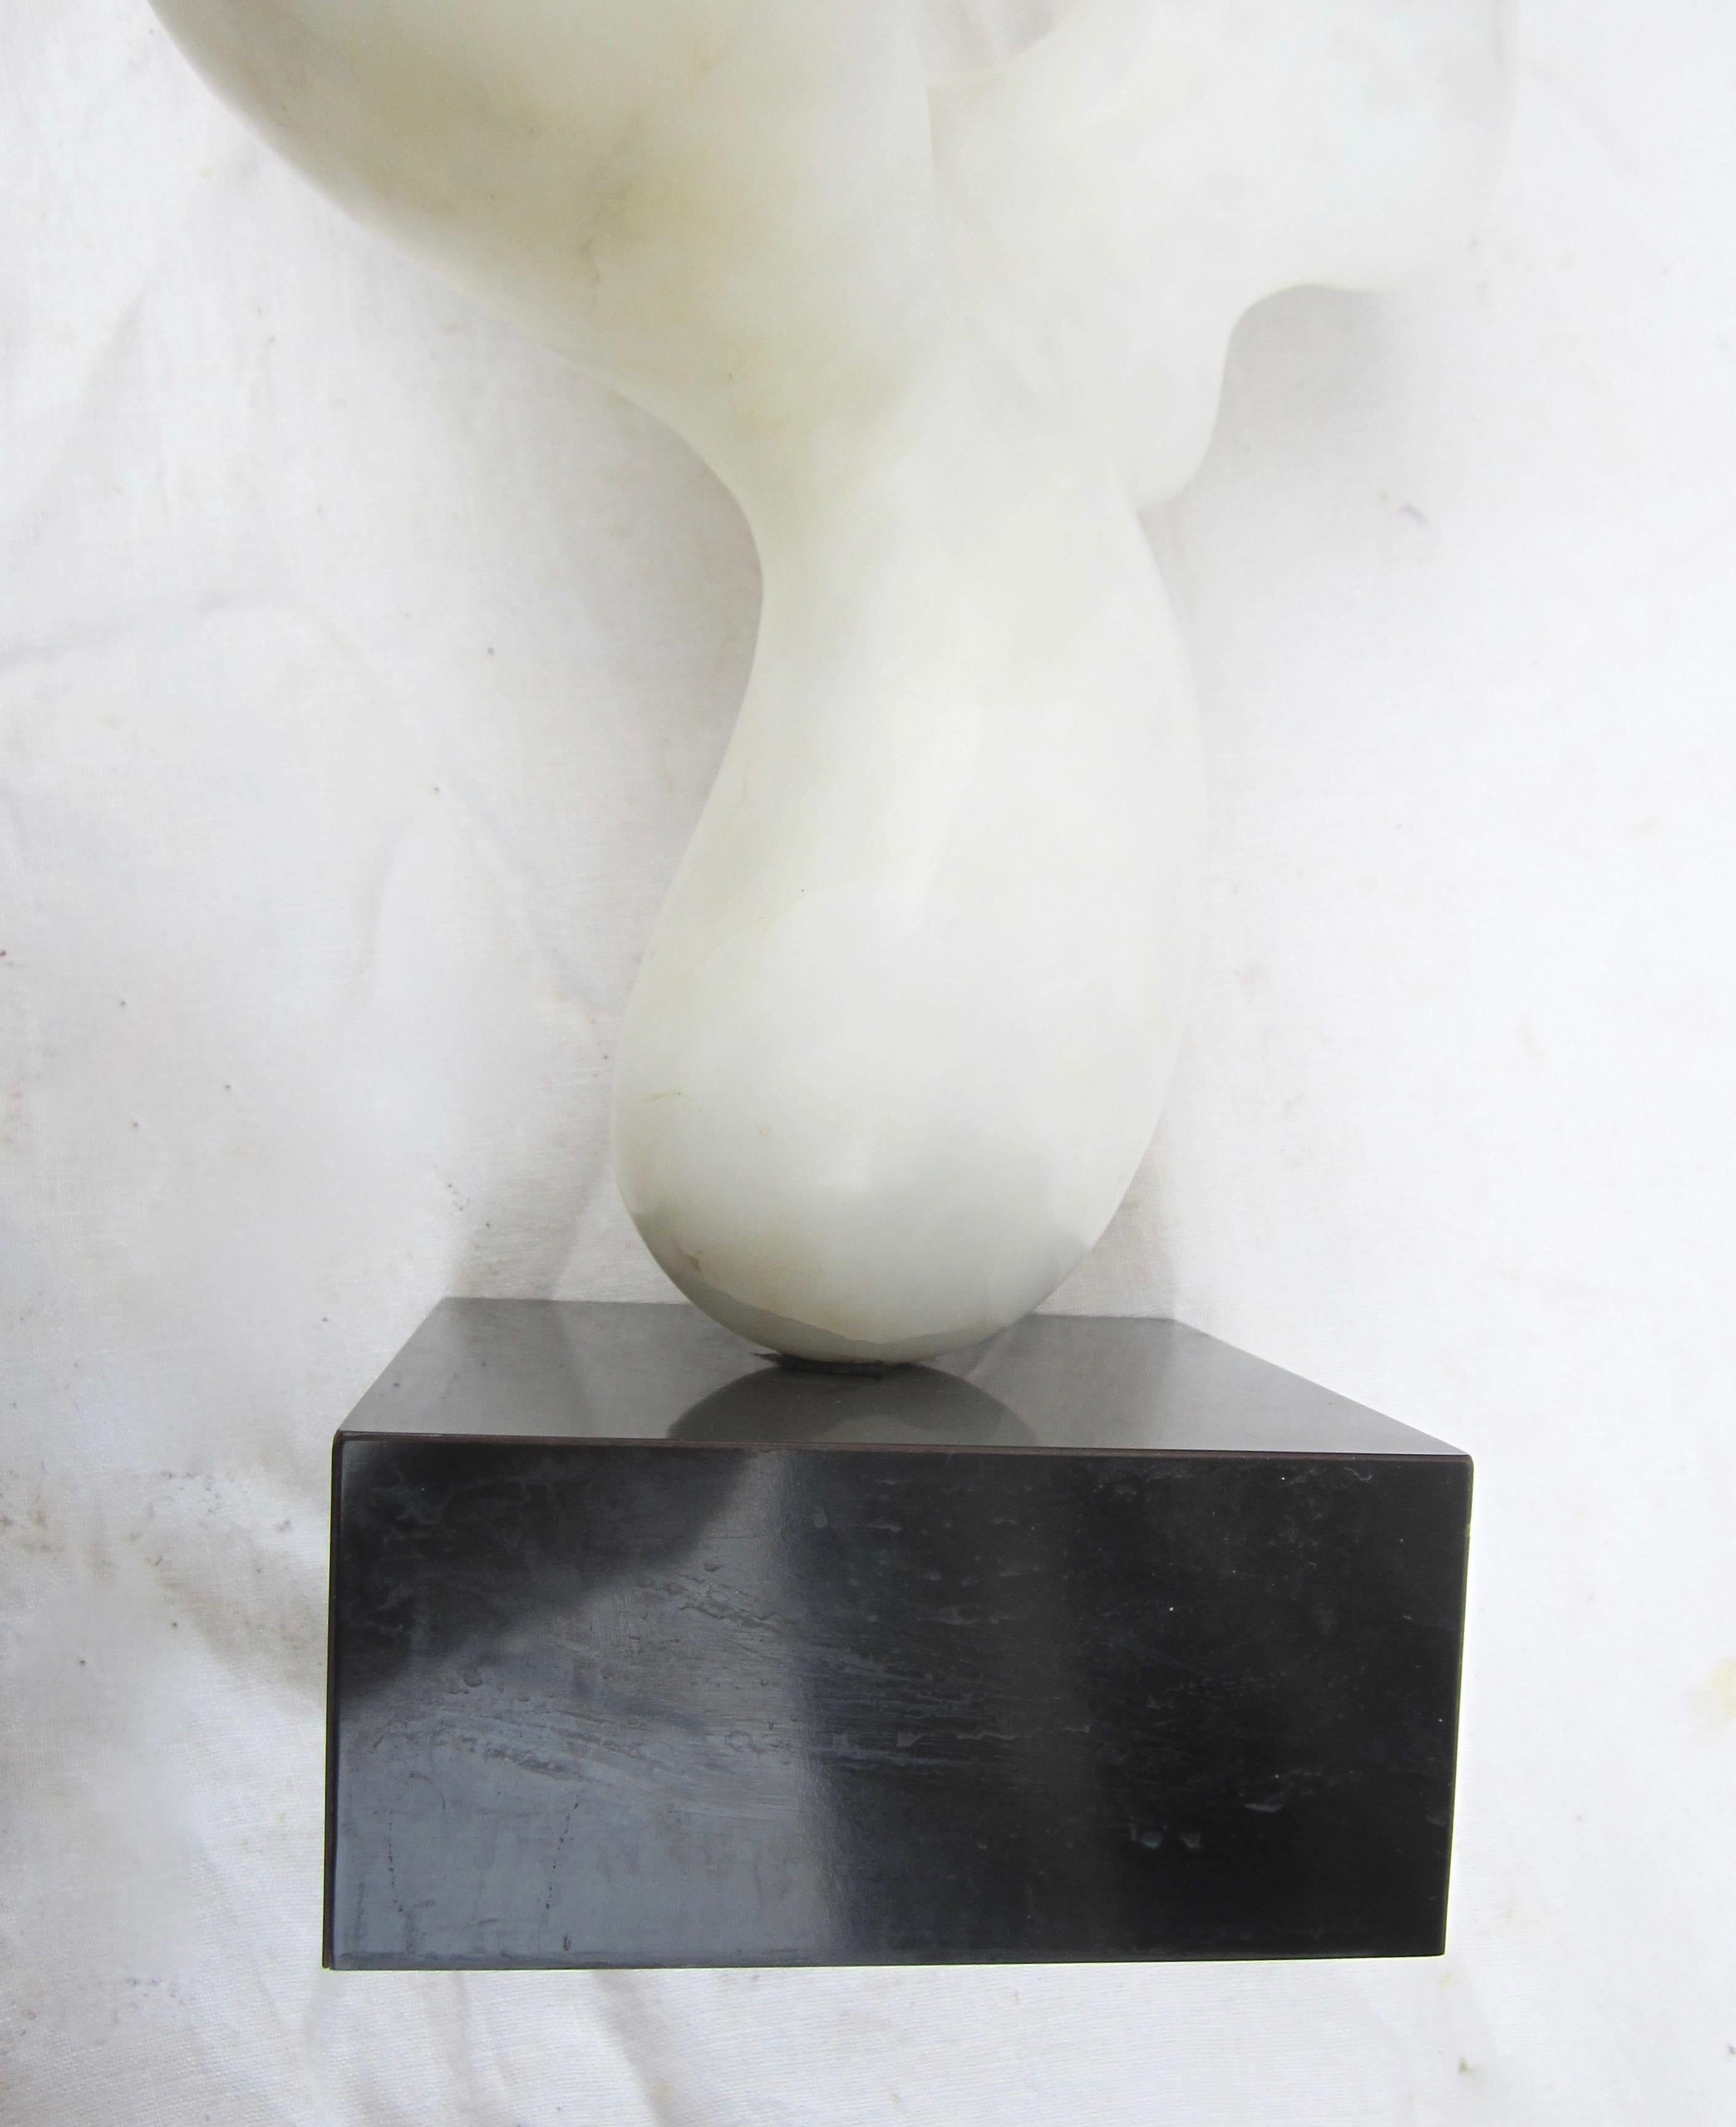 Abstract white marble sculpture on black swivel base

Base measures: 5.5